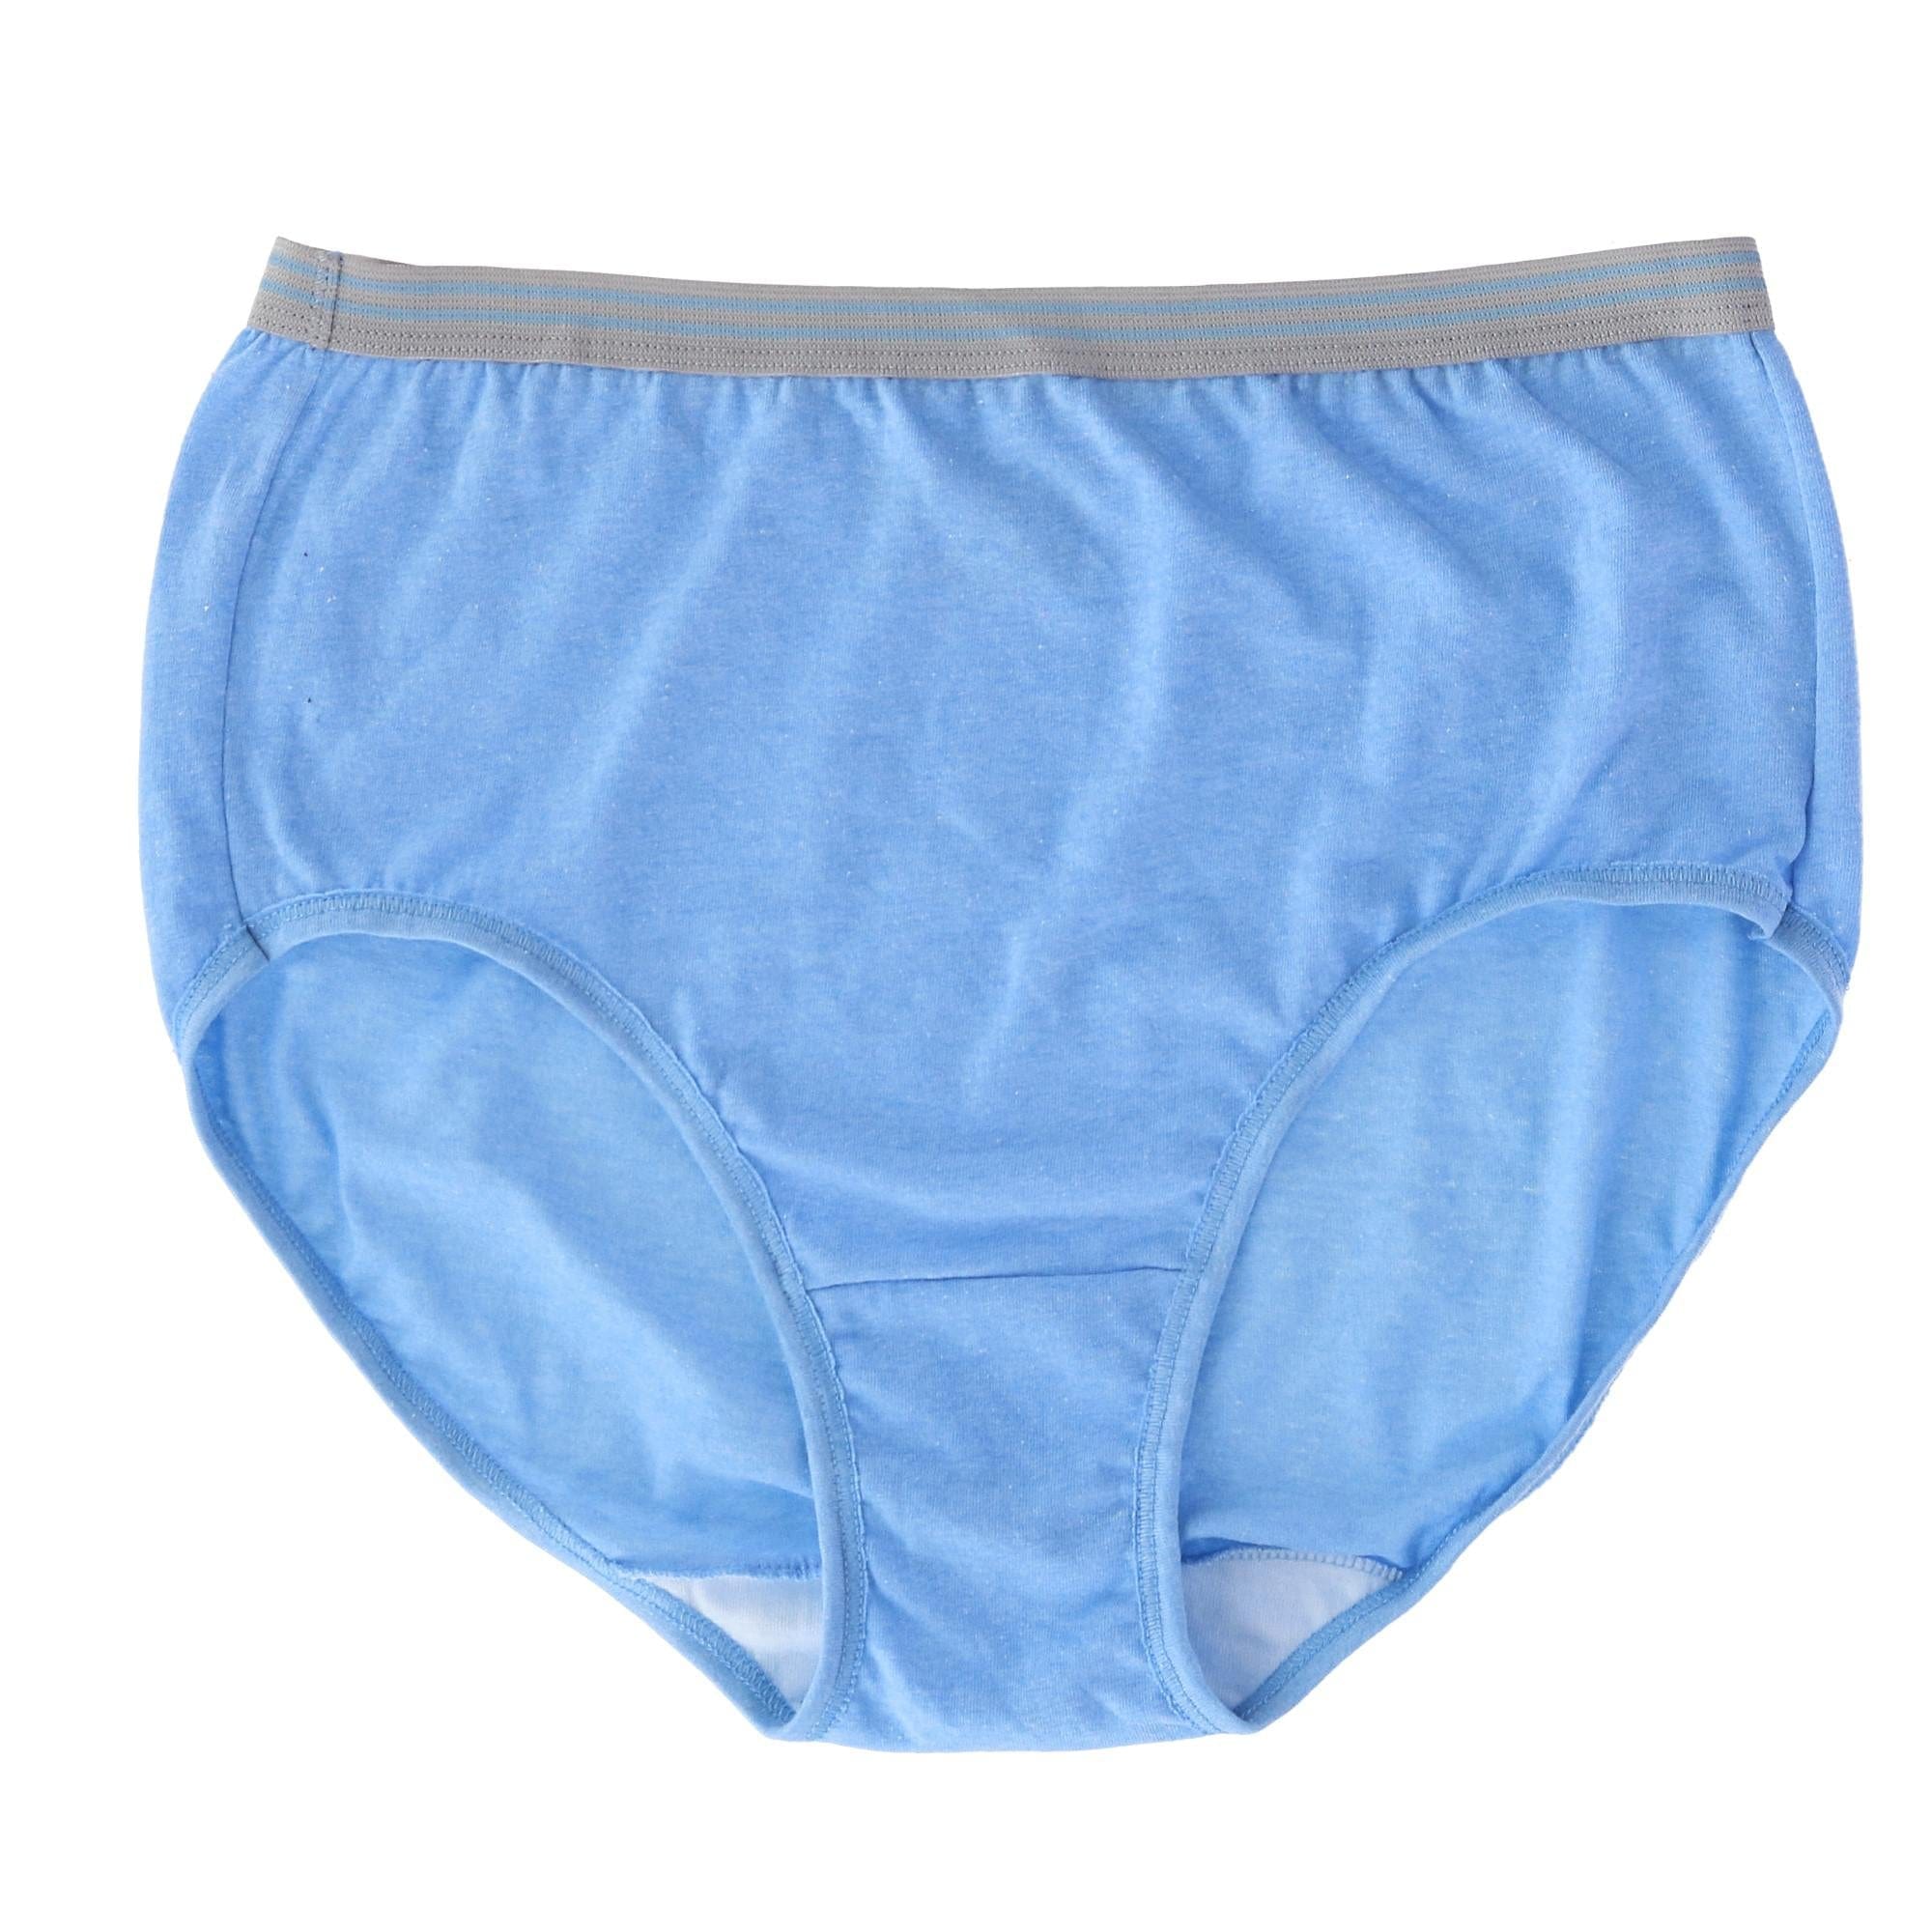 Women's Heather Brief Underwear (6 Pair Pack) by Fruit of the Loom | Briefs  at BeltOutlet.com